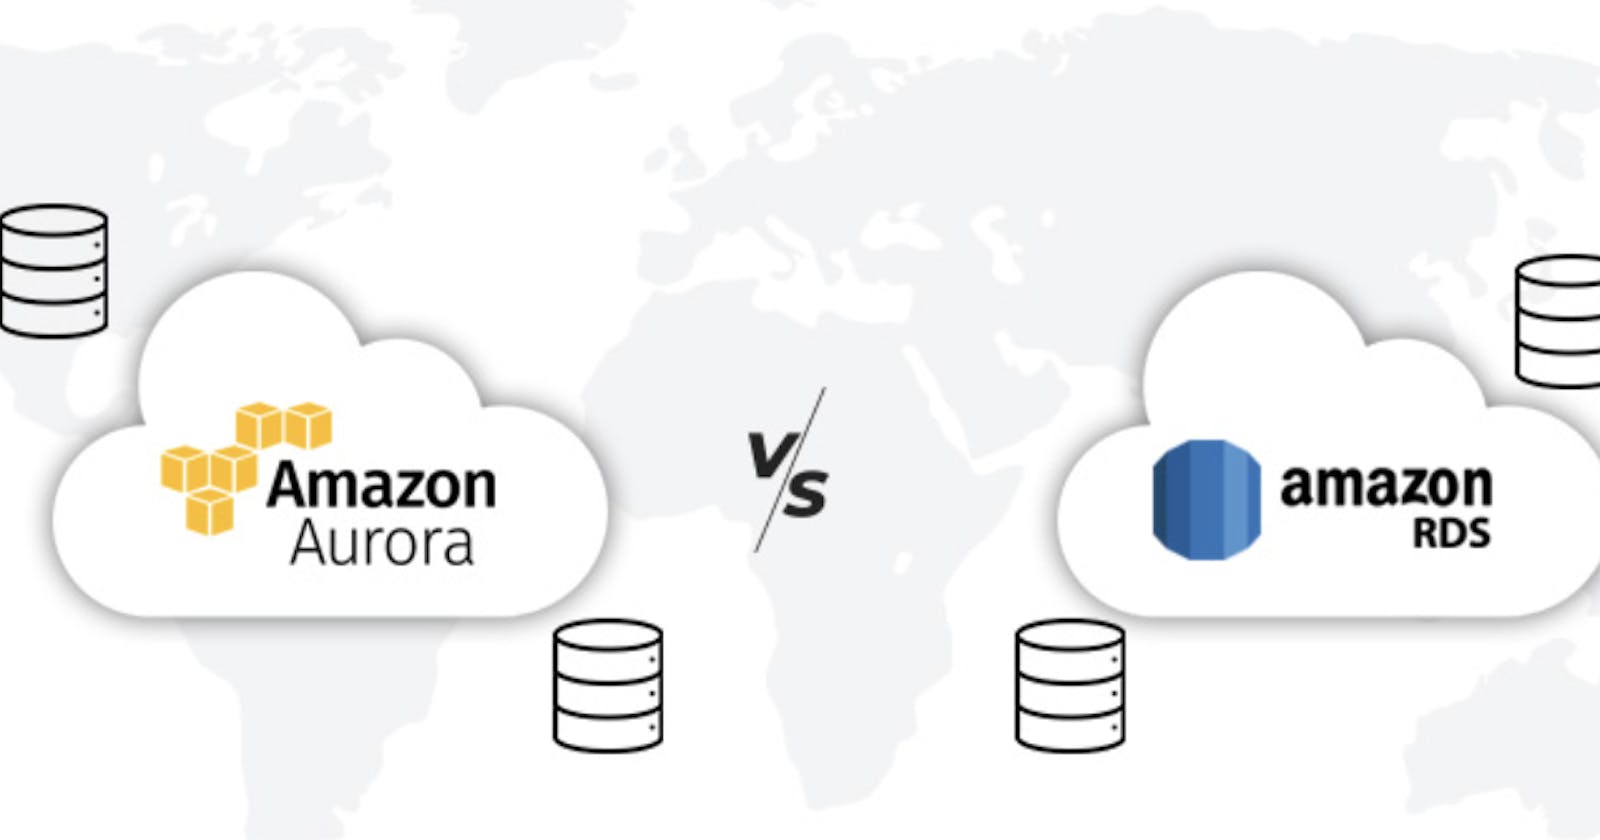 AWS — Difference between Amazon Aurora and Amazon RDS